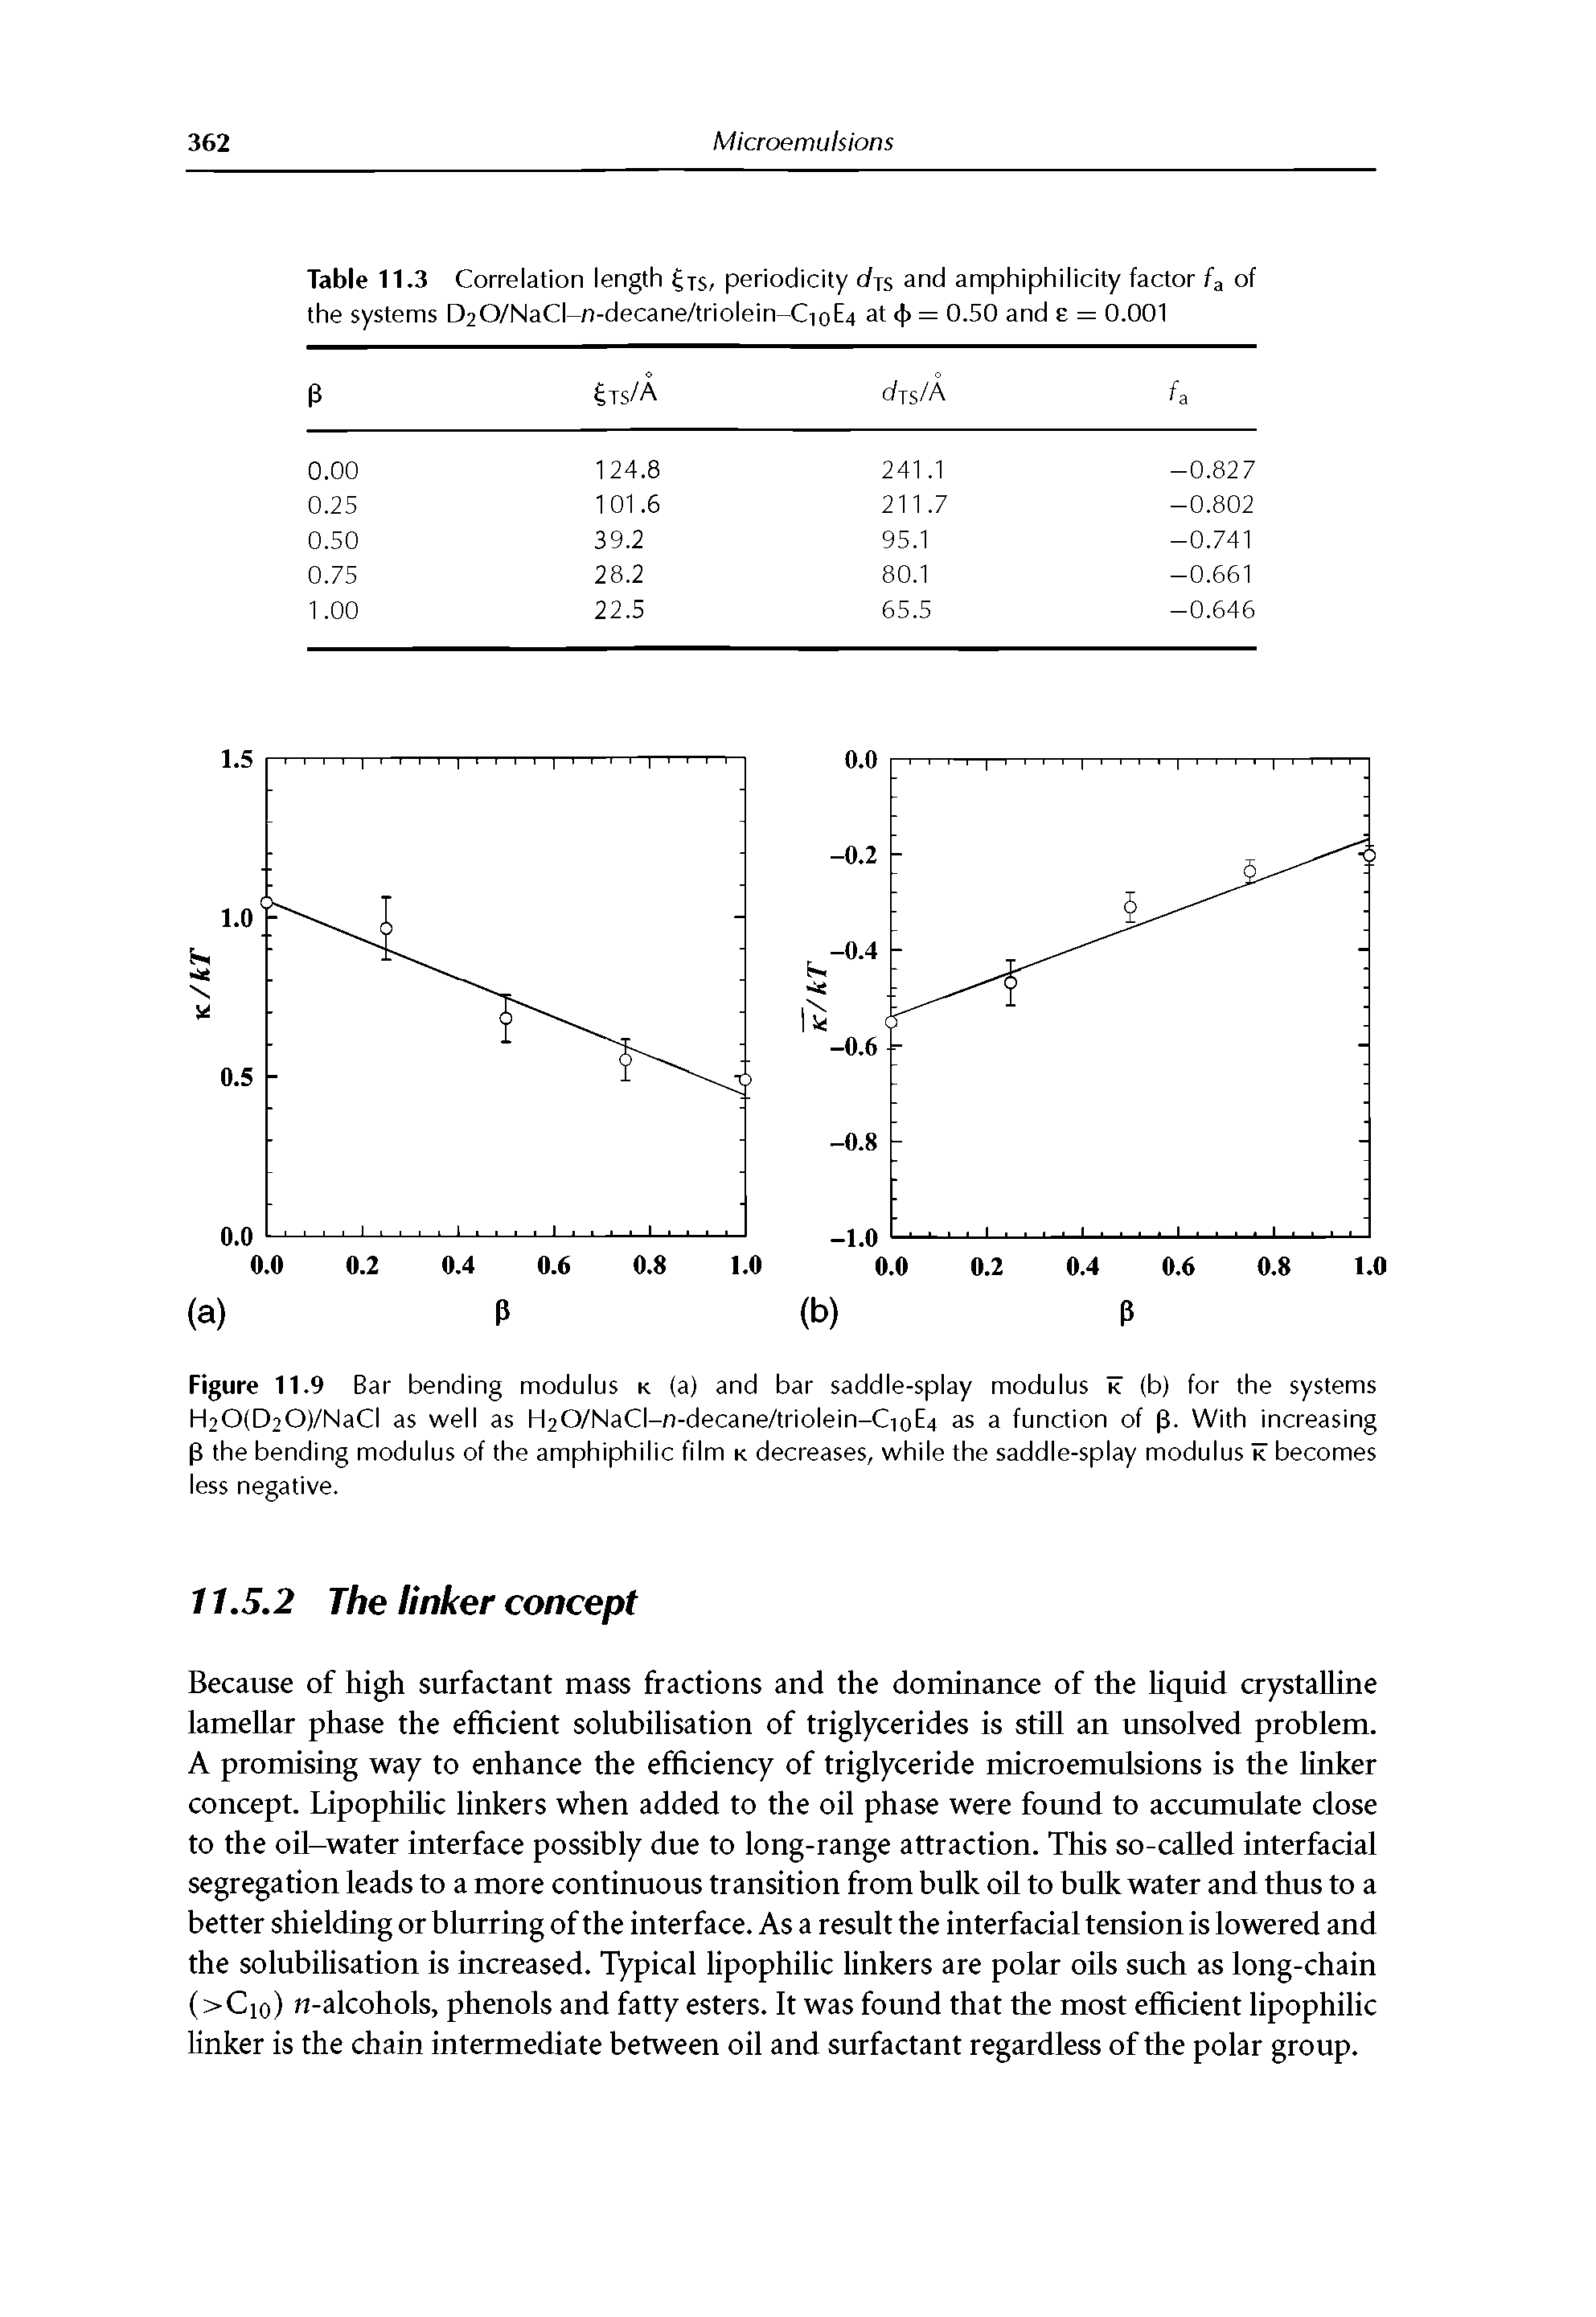 Figure 11.9 Bar bending modulus k (a) and bar saddle-splay modulus i< (b) for the systems H20(D20)/NaCI as well as H20/NaCI-n-decane/triolein-CioE4 as a function of 3. With increasing p the bending modulus of the amphiphilic film k decreases, while the saddle-splay modulus i< becomes less negative.